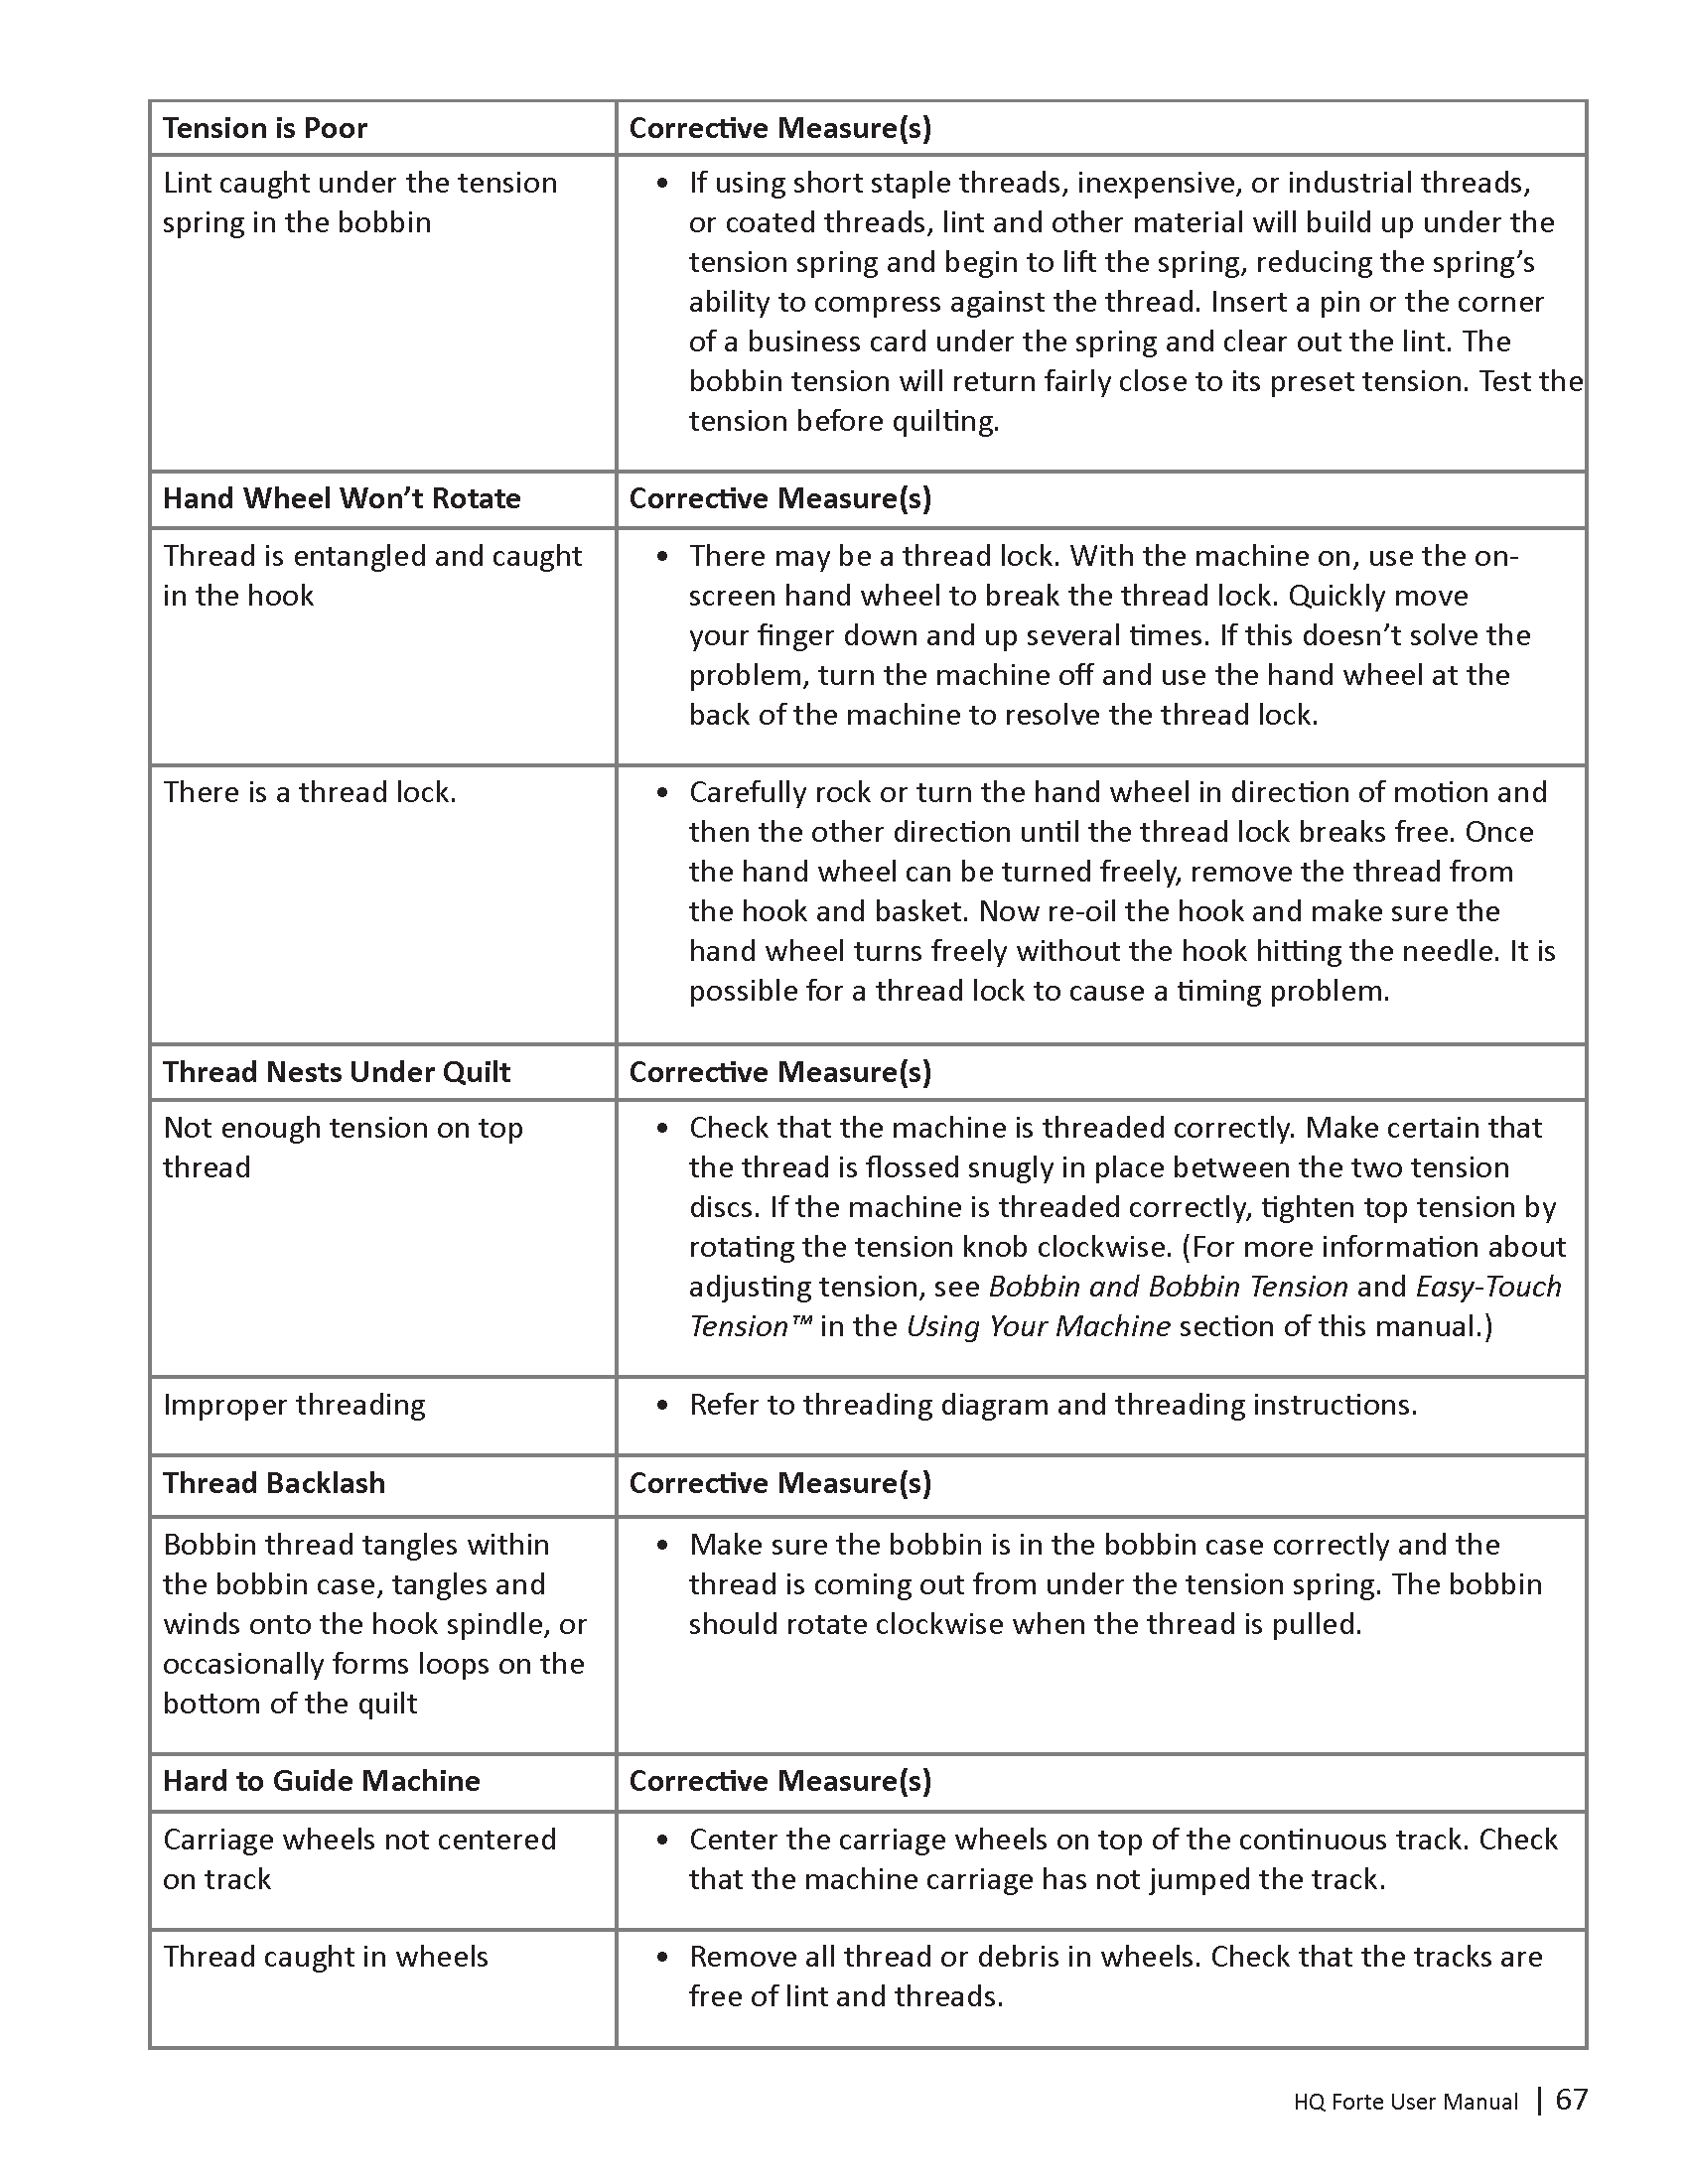 HQ-Forte-User-Manual-ALL-2_Page_68.png